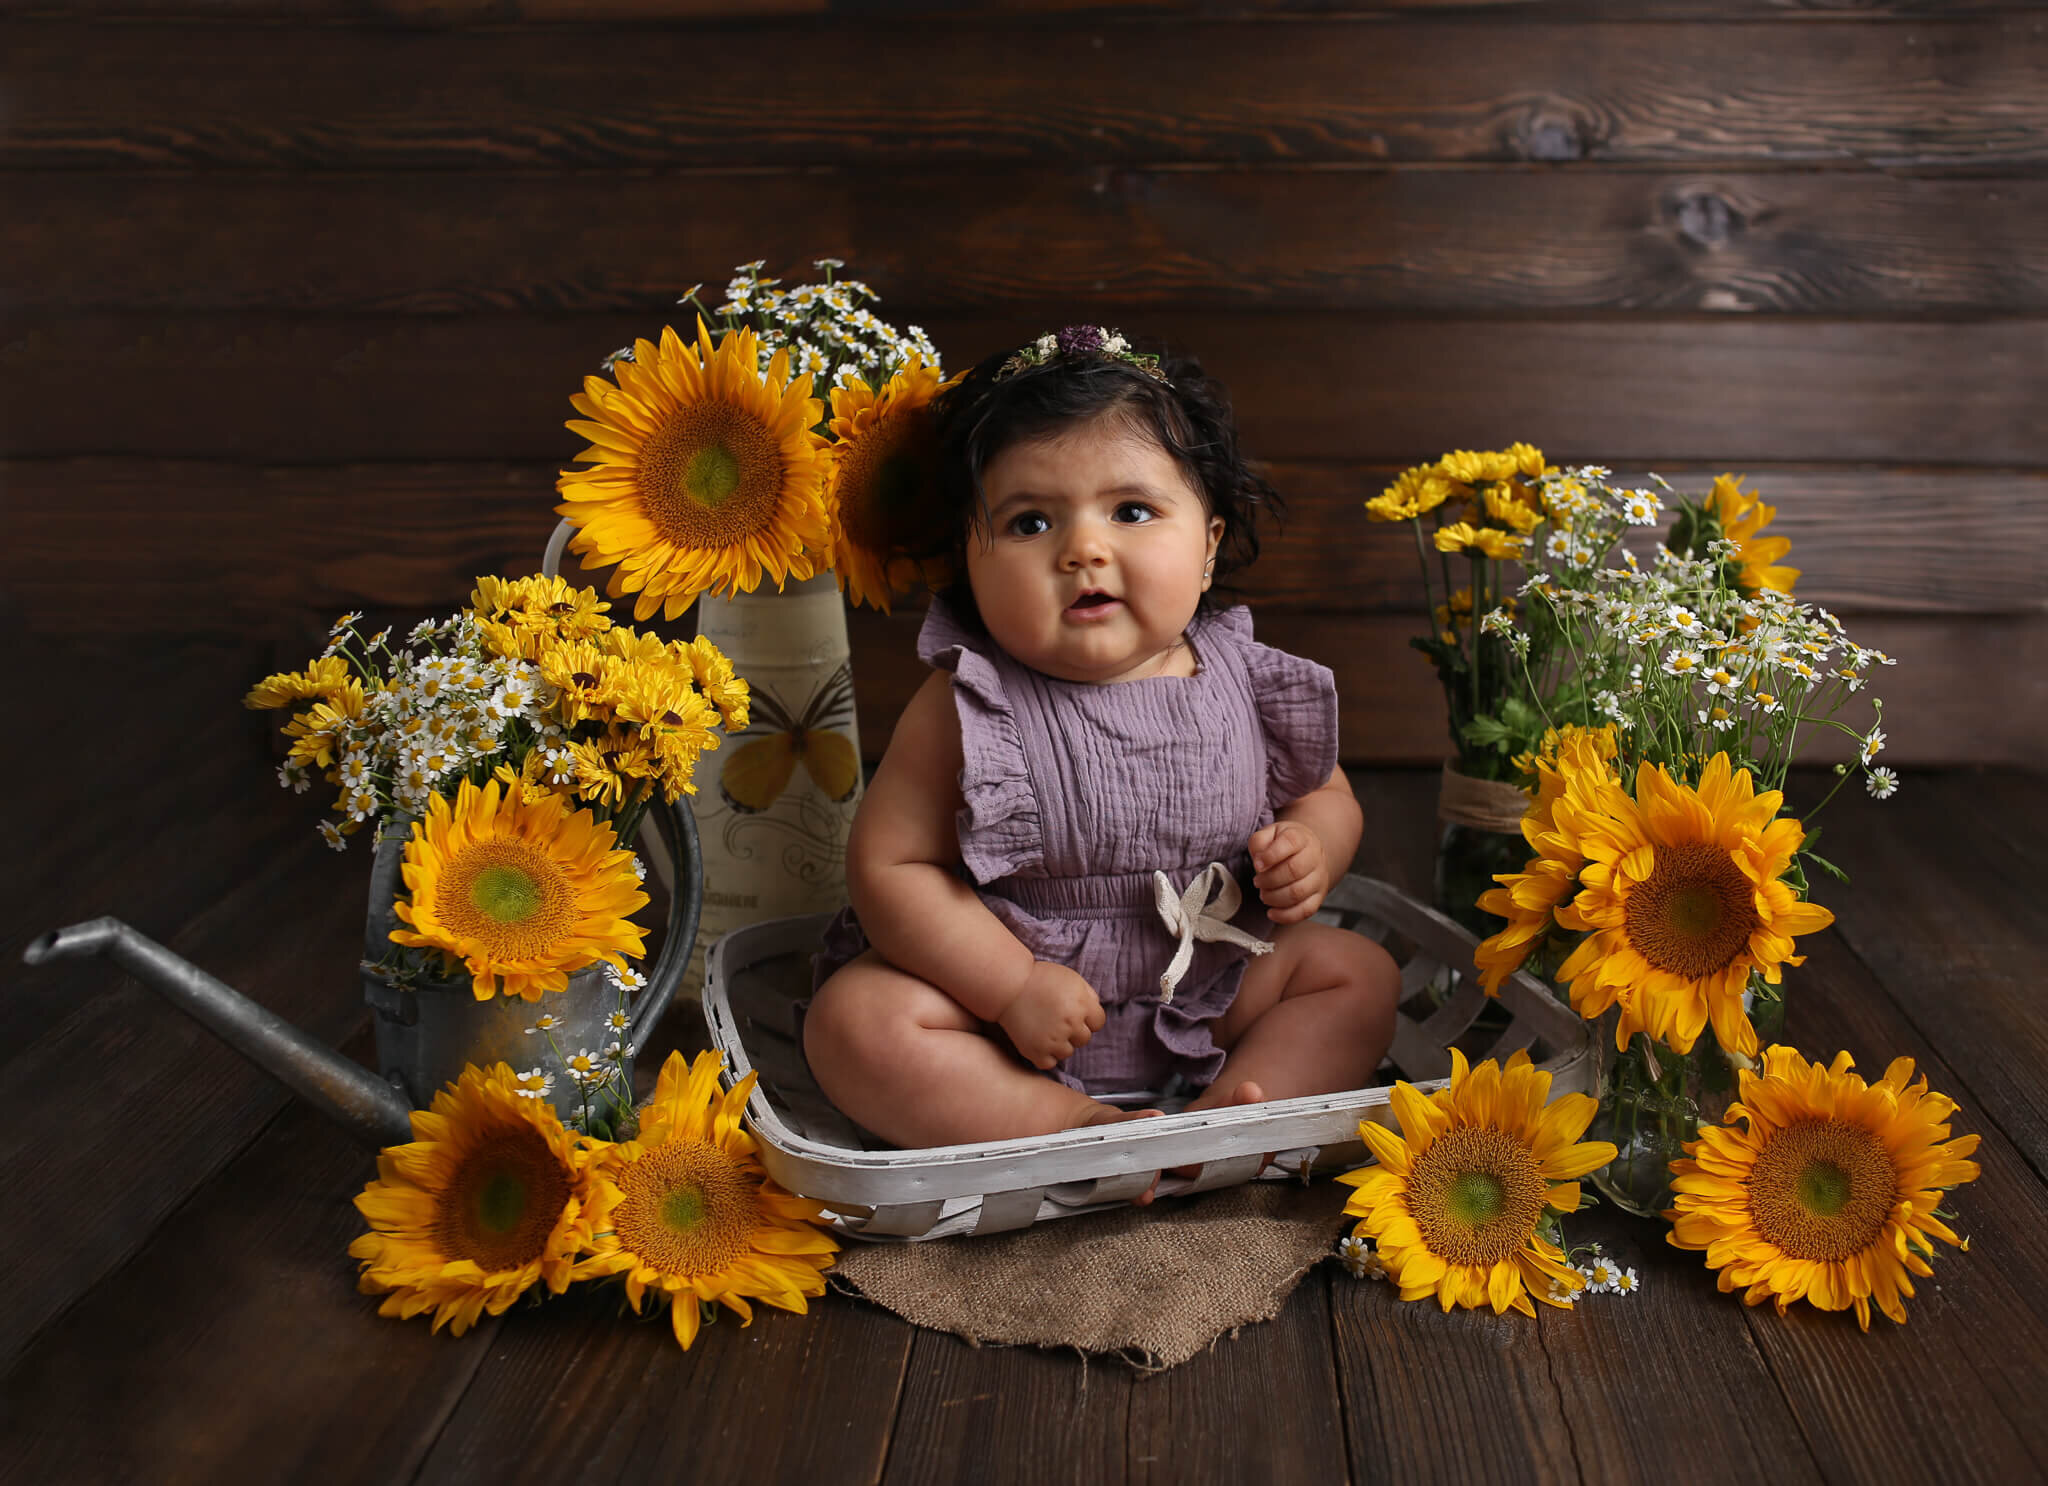  An image of a baby girl dressed in a ruffled short playsuit, sitting in a basket surrounded by cheerful sunflowers and daisies, marking an important milestone by Photography by L Rose, baby photography in San Diego 